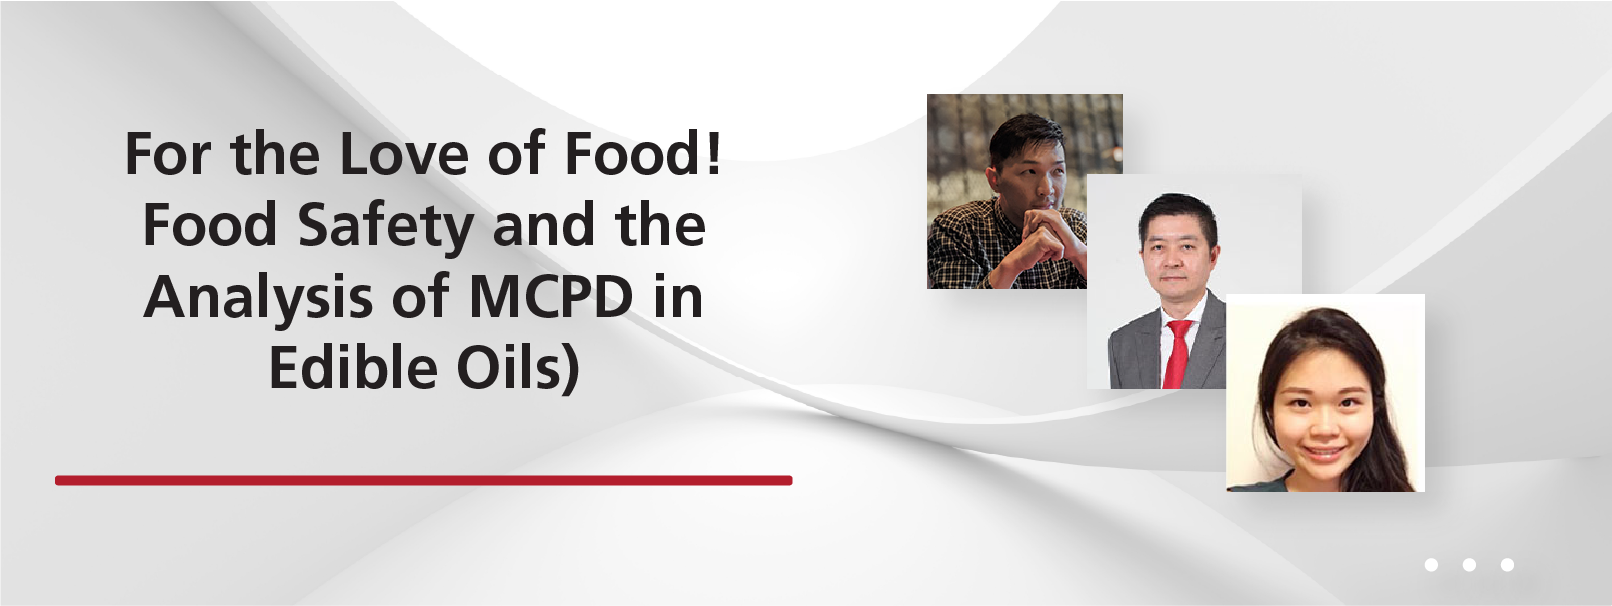 For the Love of Food! Food Safety and the Analysis of MCPD in Edible Oils